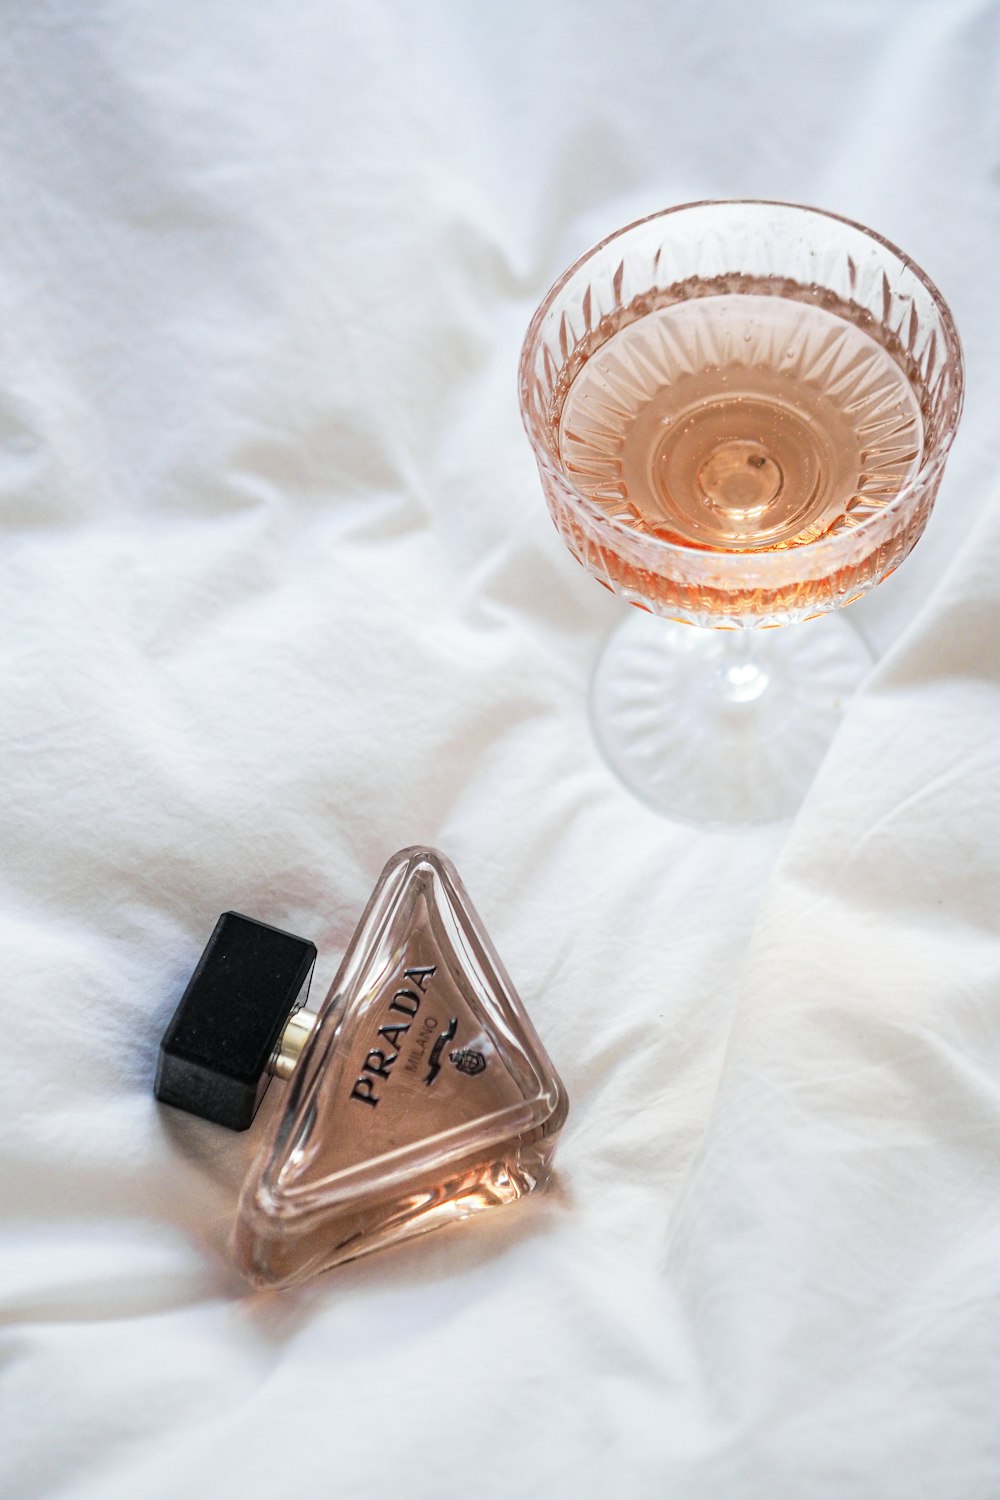 a bottle of perfume sitting next to a glass